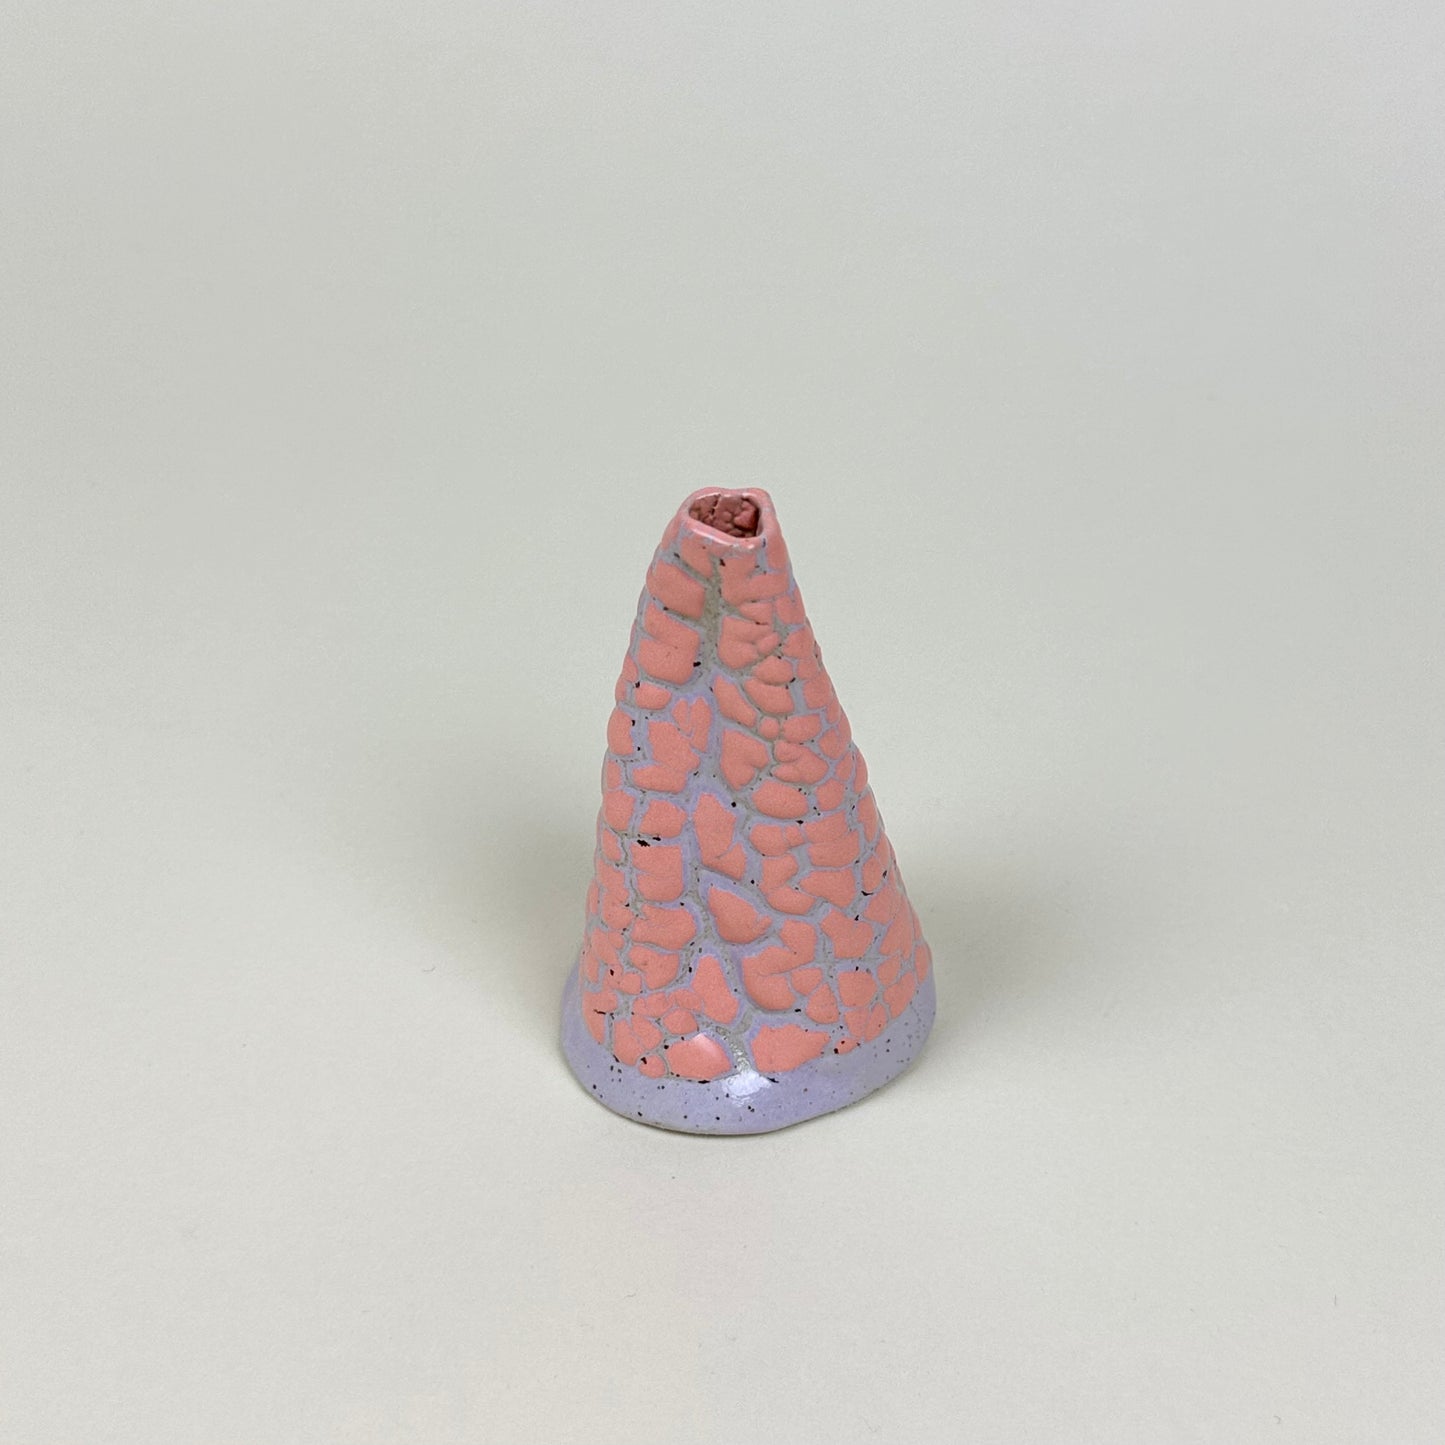 Purple and pink volcano vase (S) by Astrid Öhman